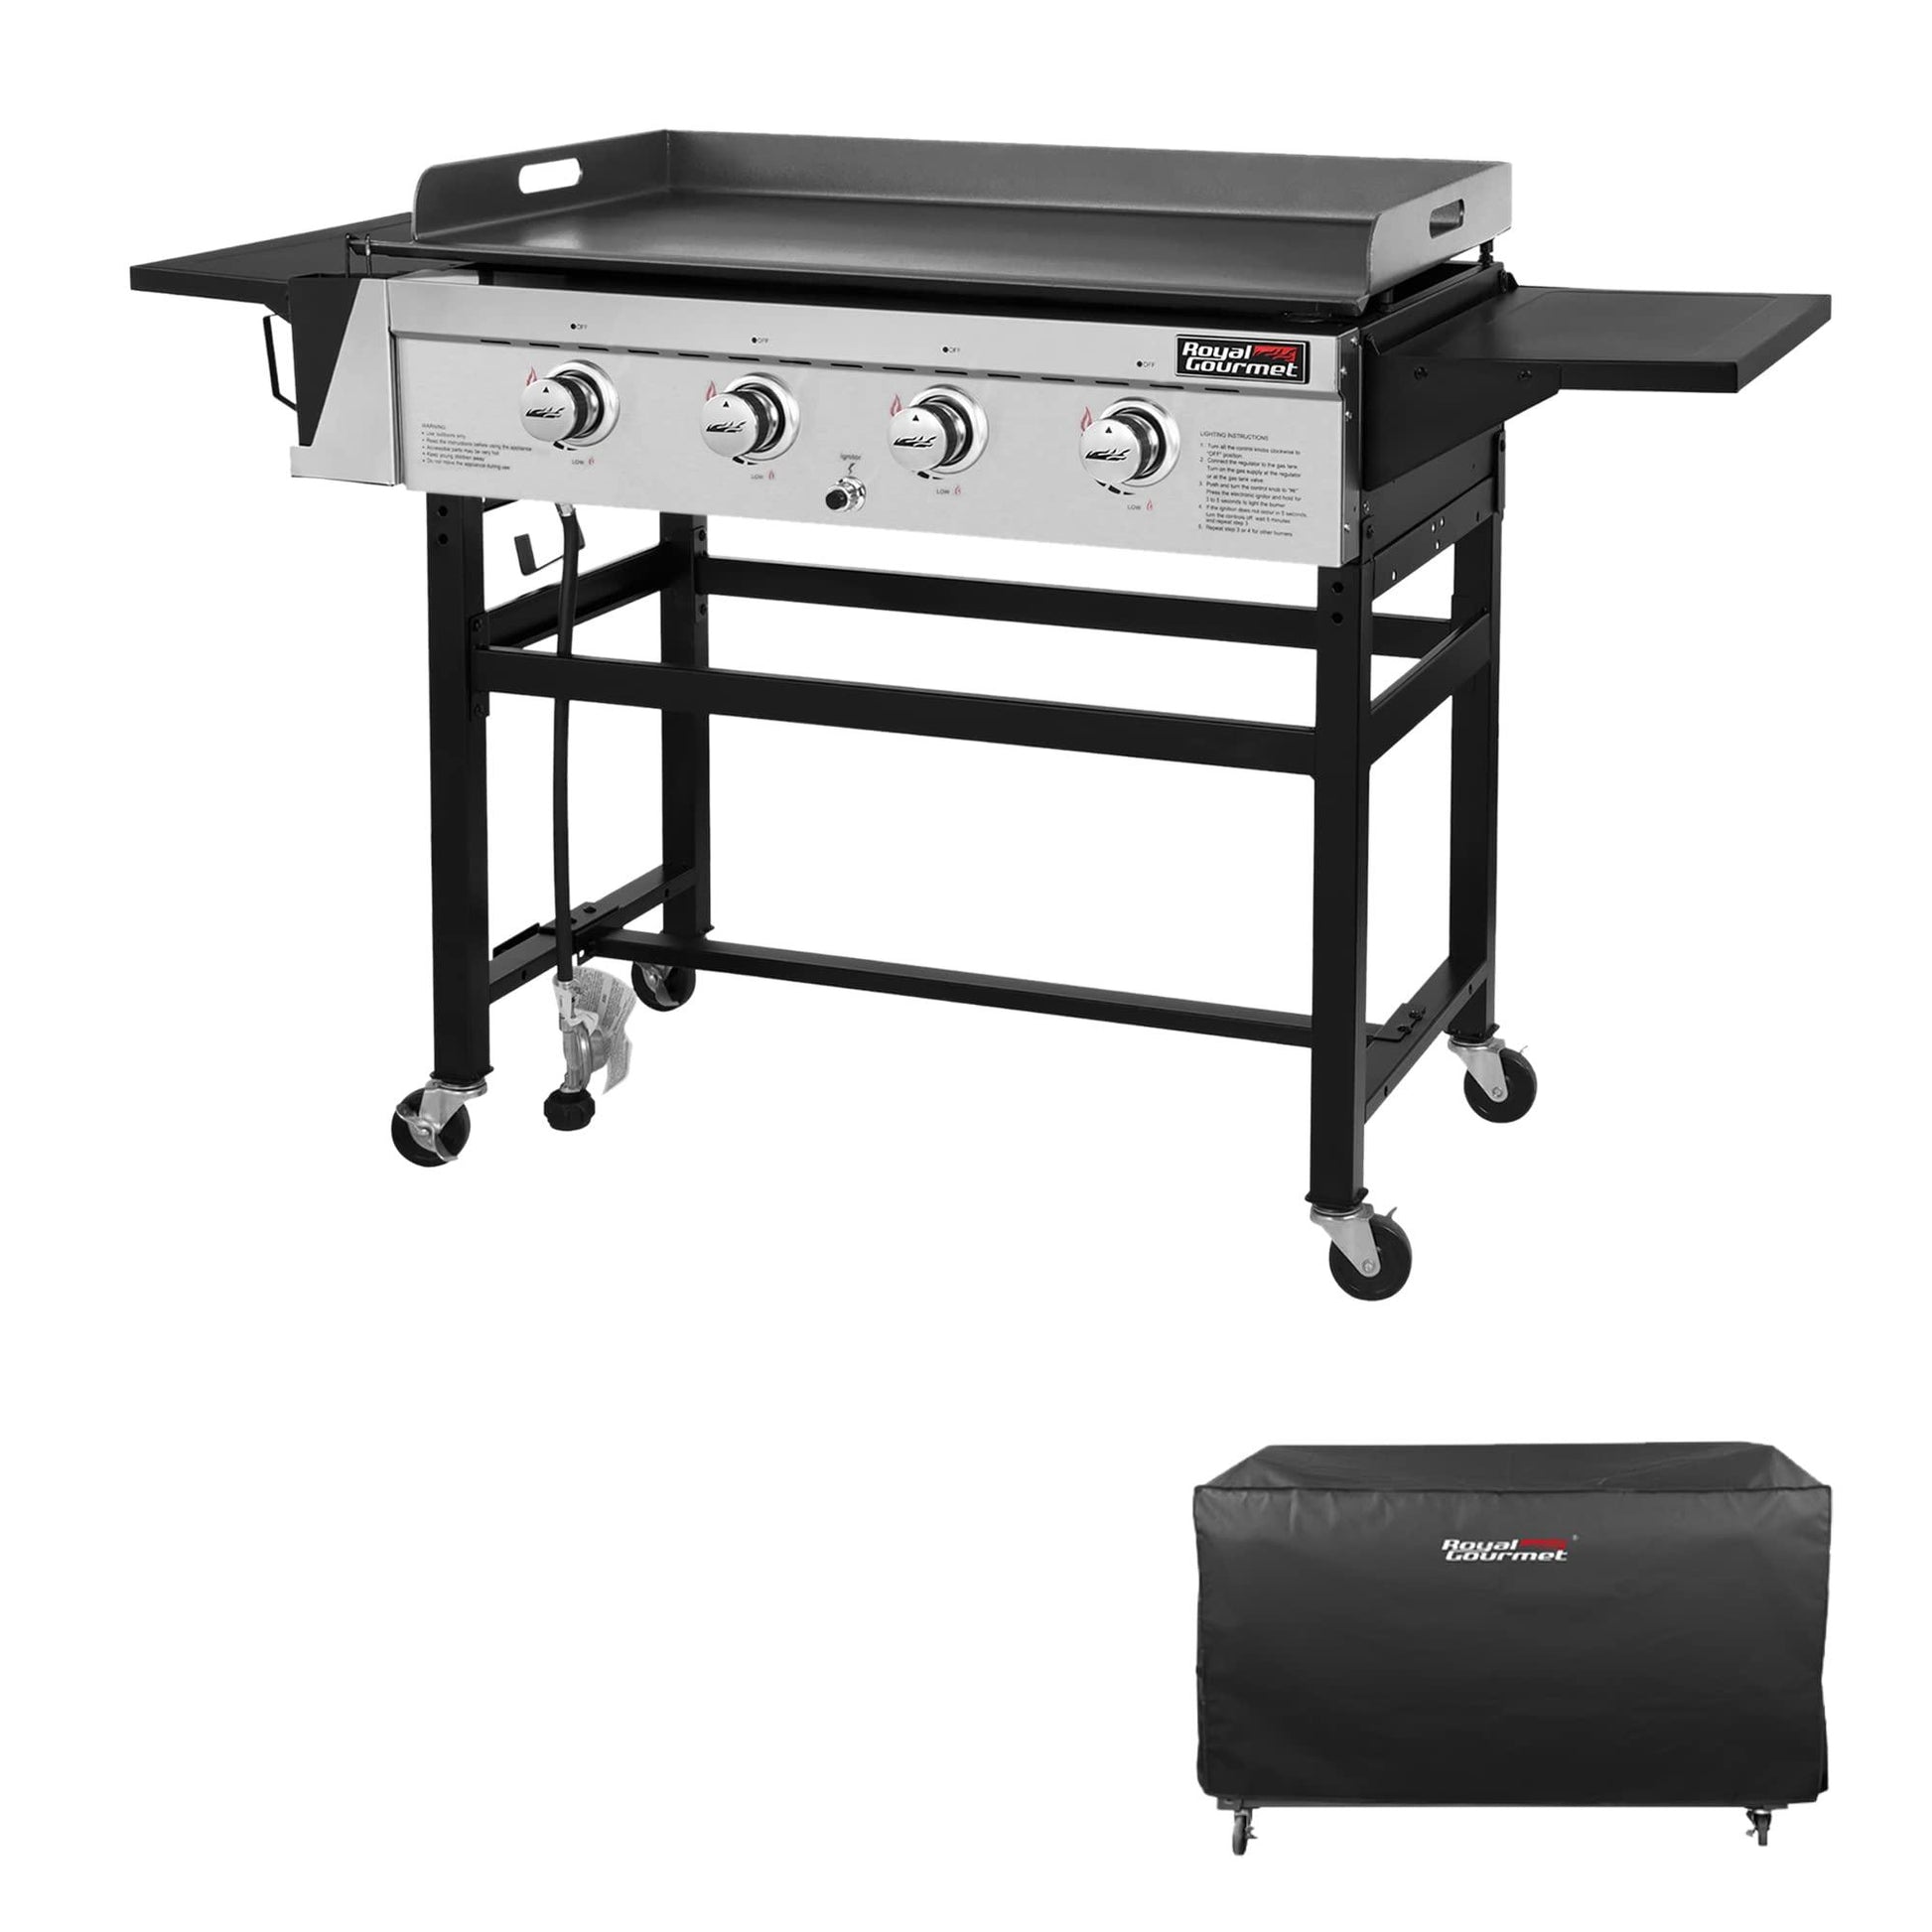 Royal Gourmet 4 Burner Flat Top Grill Griddle Combo Outdoor propane Gas Griddle, GB4001C, 52,000 BTU For Outdoor Events, Camping, BBQ 61.02*23.62*37.60 inches - CookCave